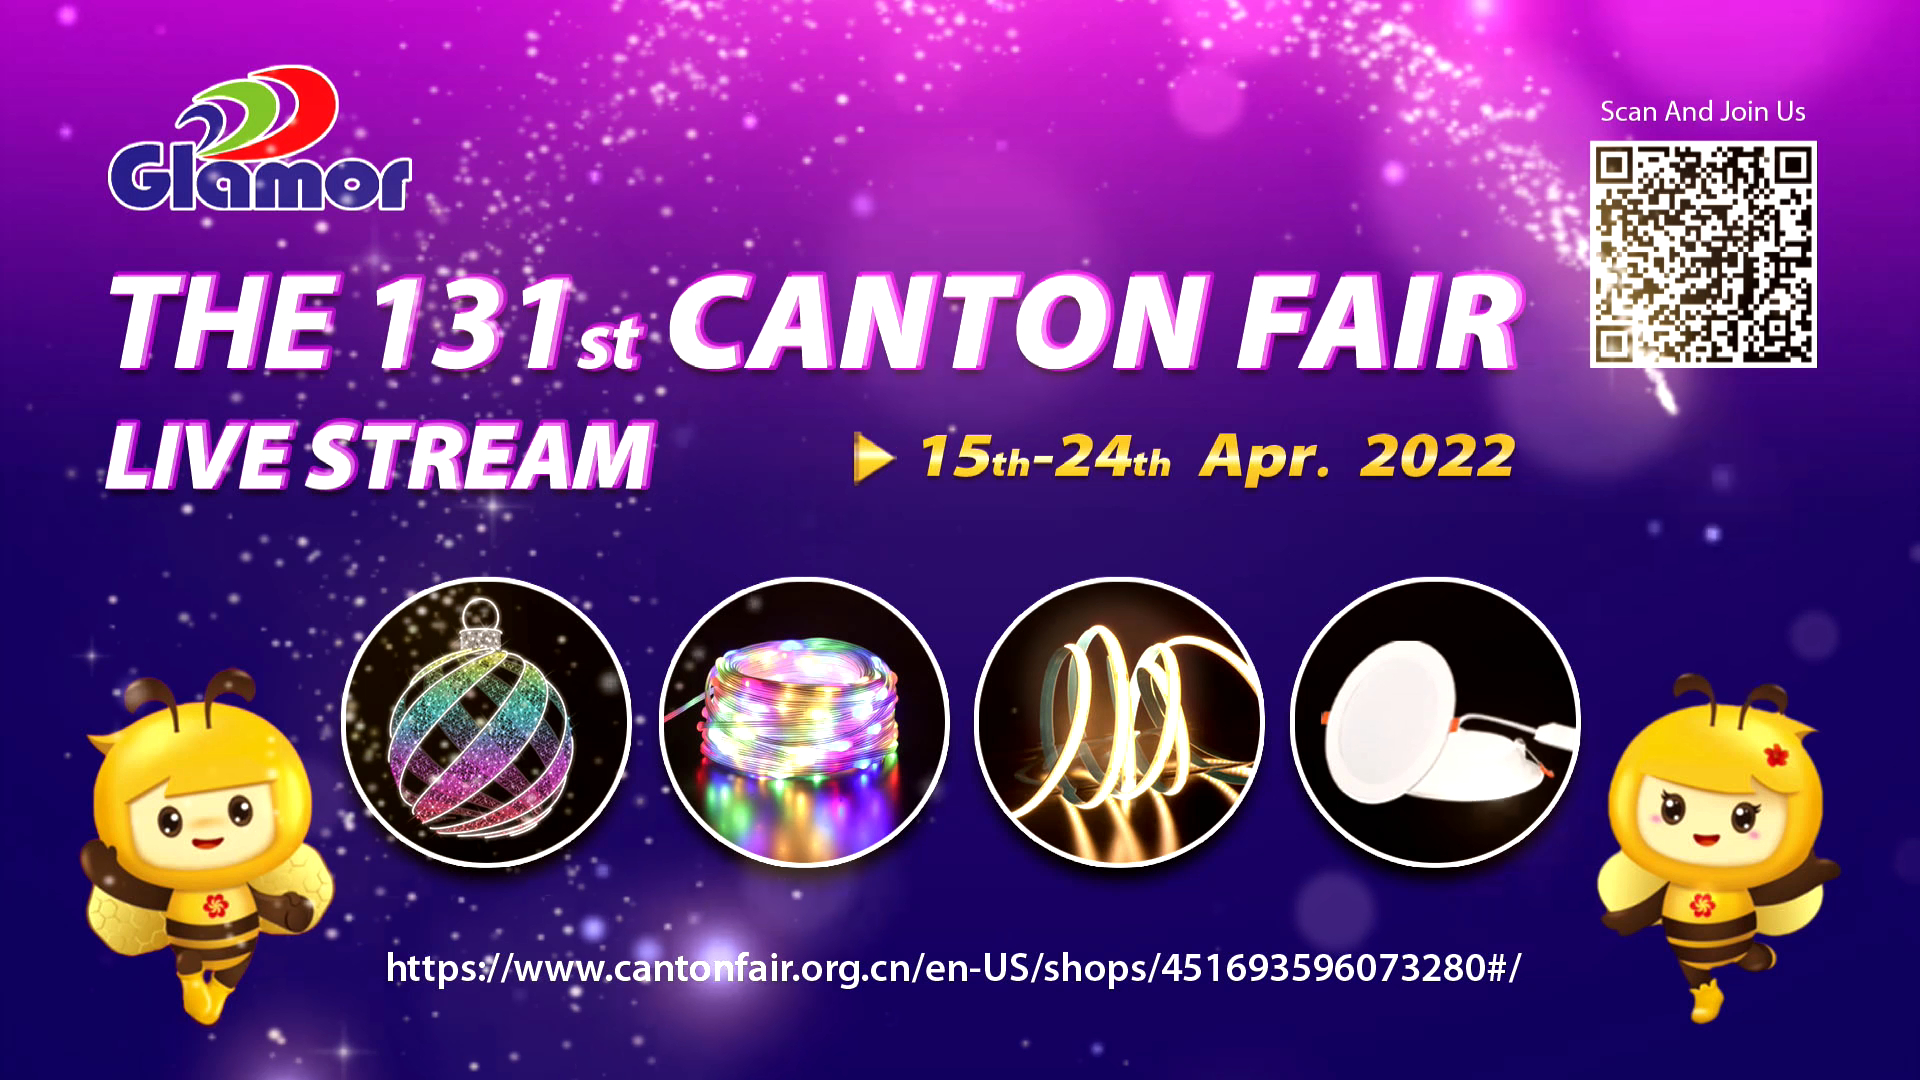  See you at the 131st Canton Fair online Products | GLAMOR 